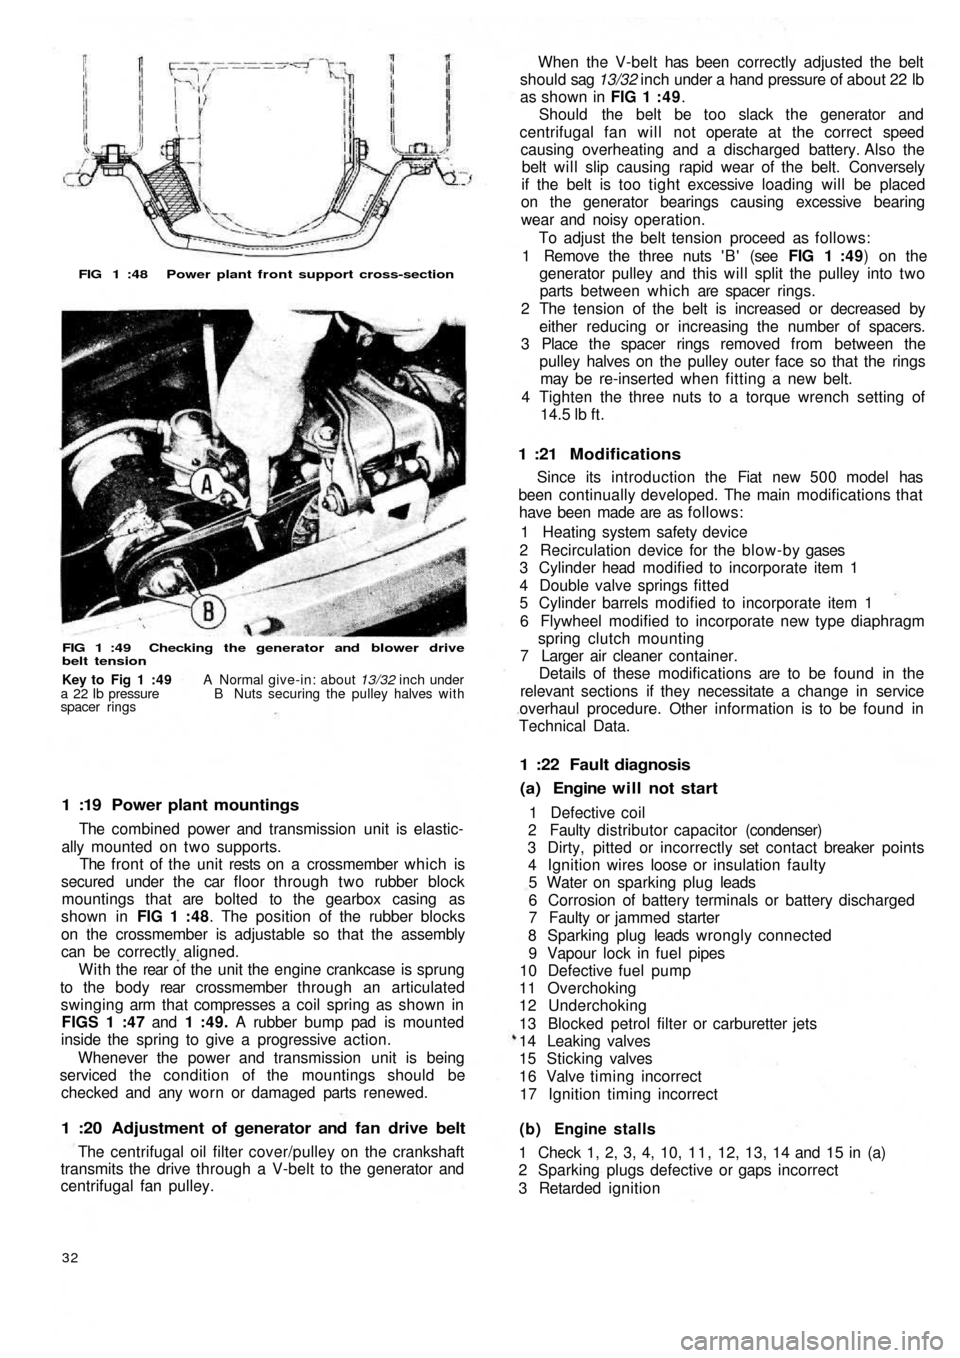 FIAT 500 1960 1.G Workshop Manual FIG 1 :48  Power plant front support cross-section
FIG 1 :49  Checking  the generator and  blower drive
belt tension
1 :19  Power plant mountings
The combined power and transmission unit is elastic-
a